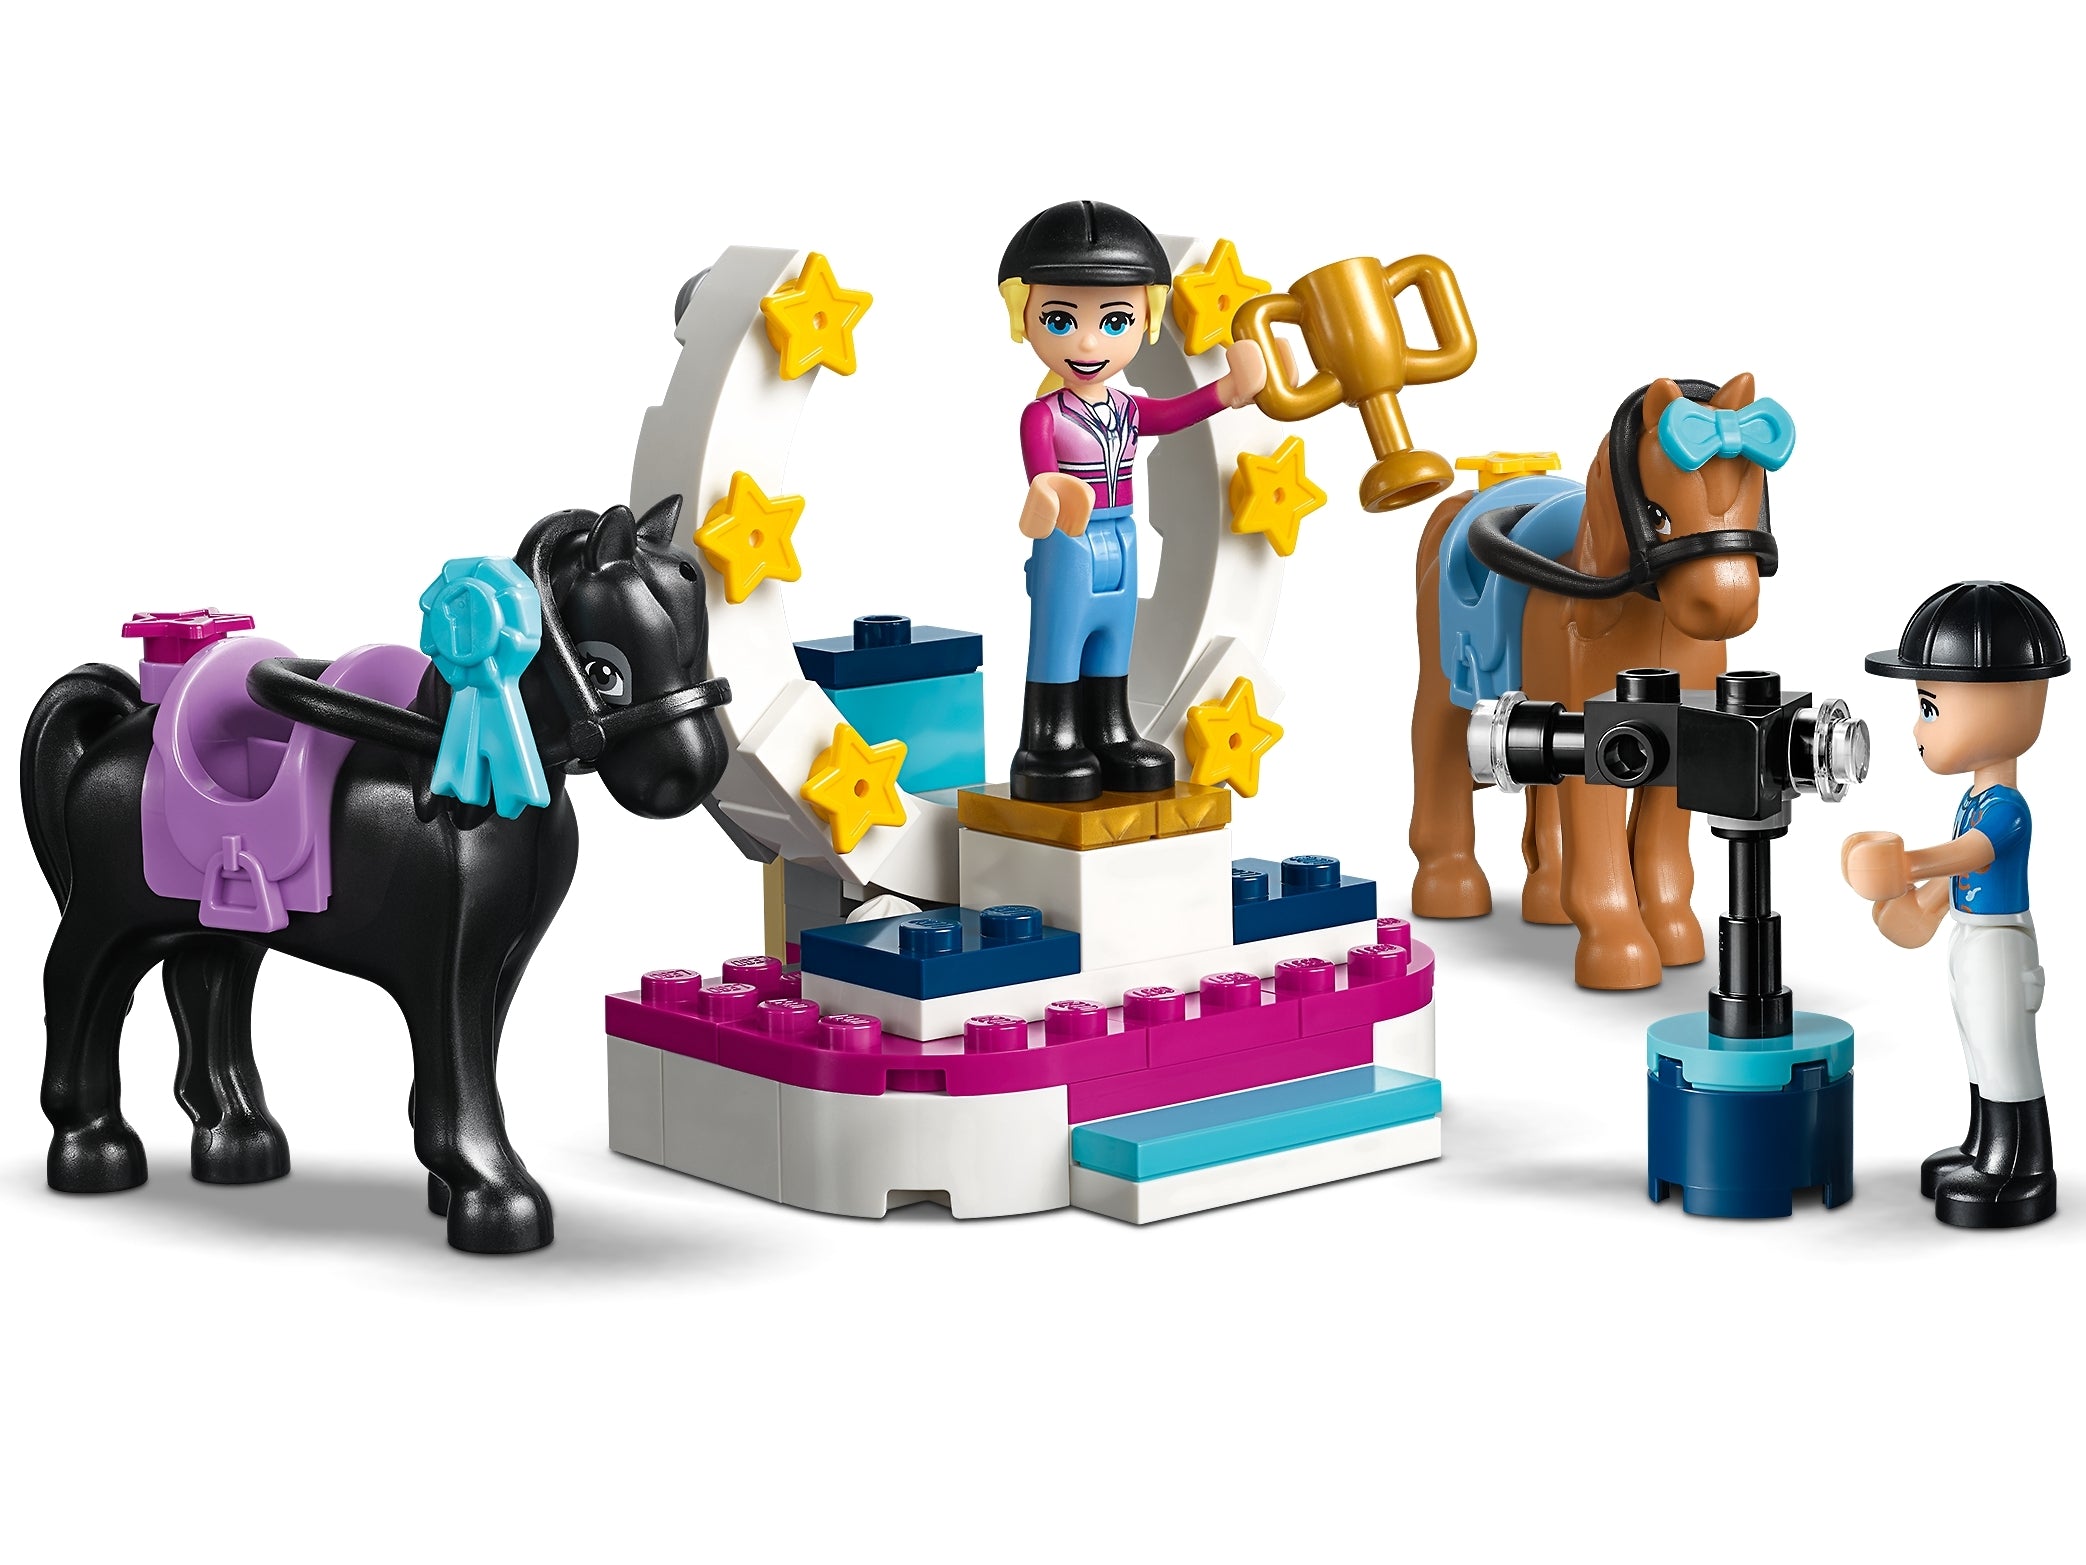 Lego Friends Stephanie’s Horse Jumping 41367 - Albagame